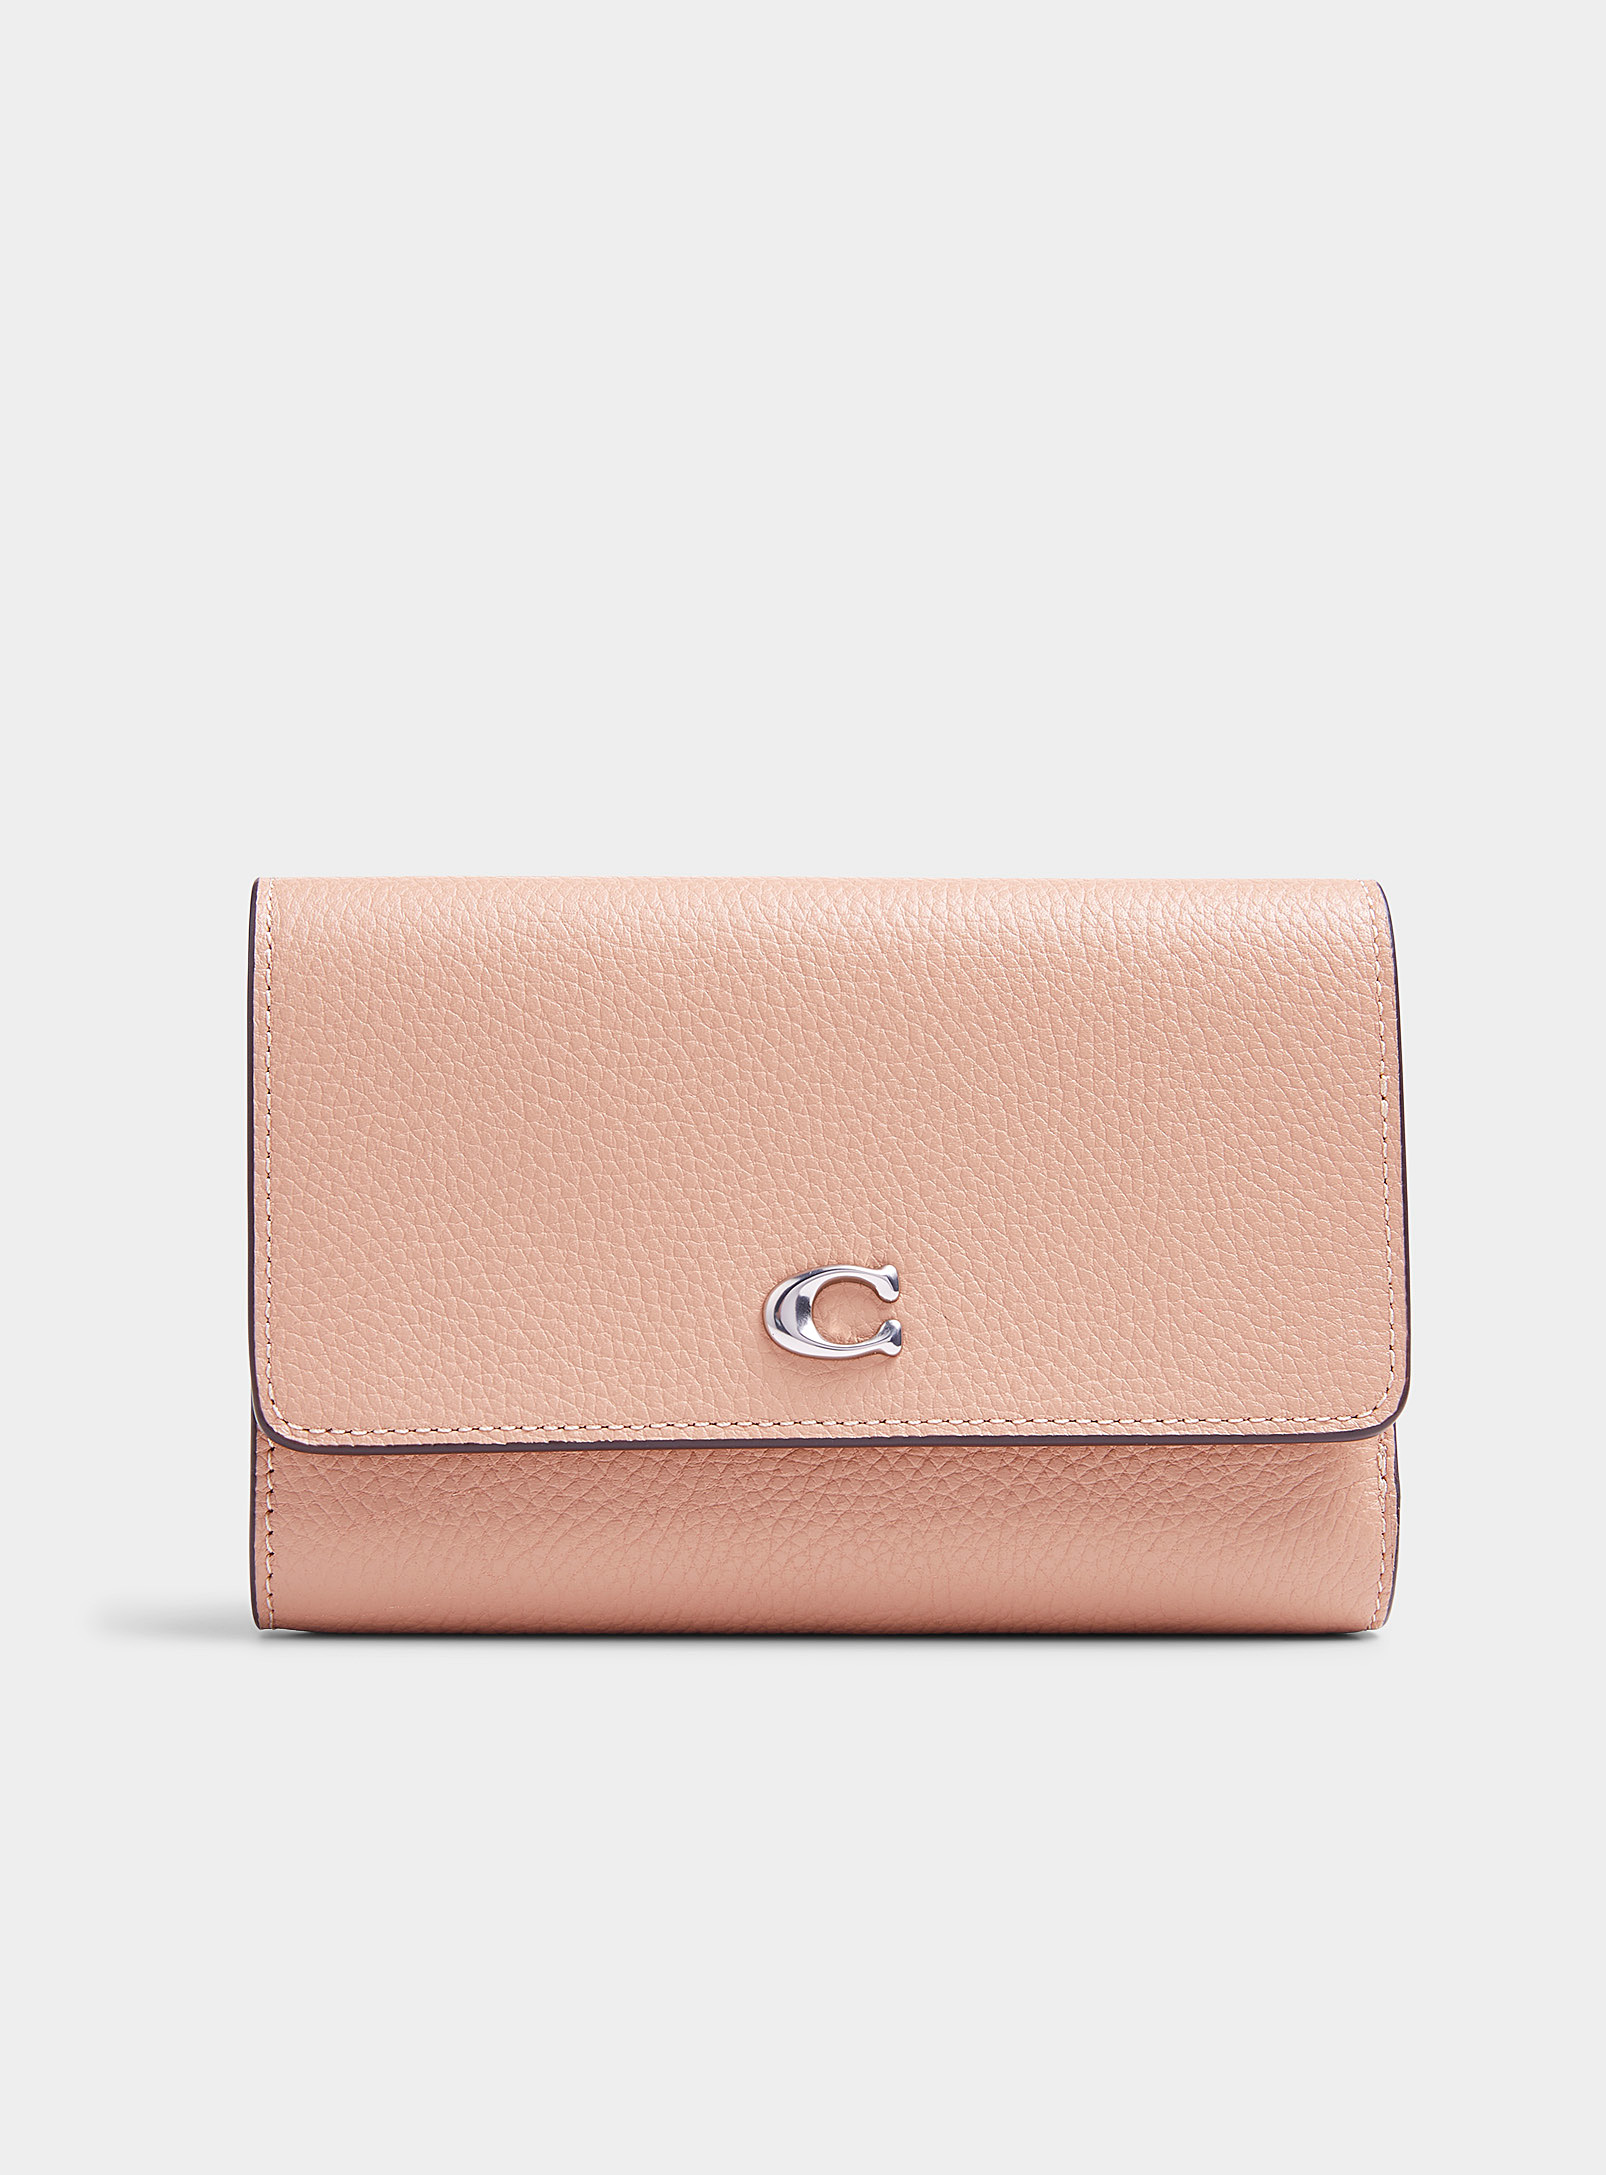 Coach Signature Leather Flap Wallet In Pink